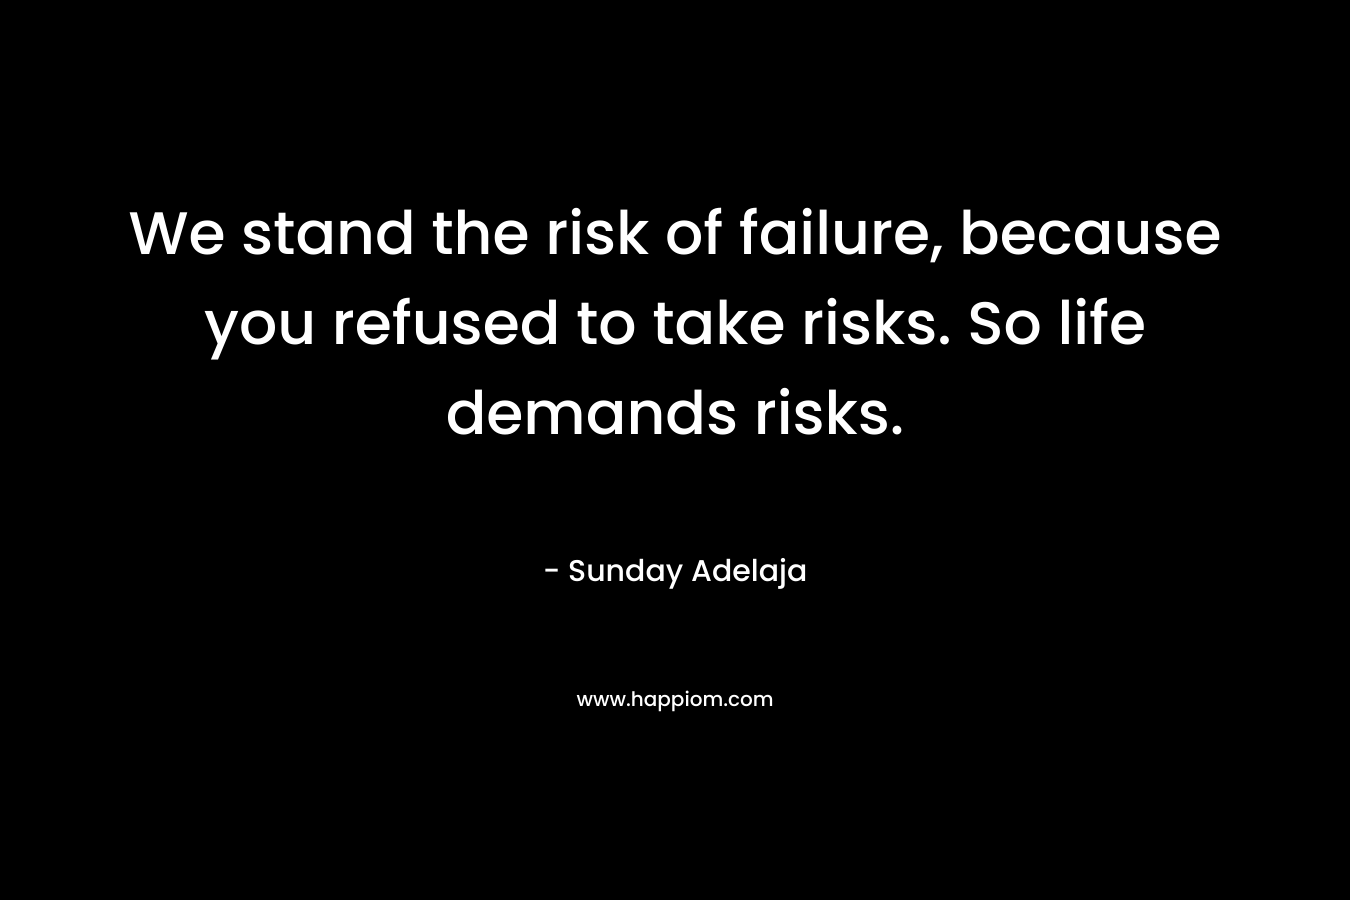 We stand the risk of failure, because you refused to take risks. So life demands risks. – Sunday Adelaja